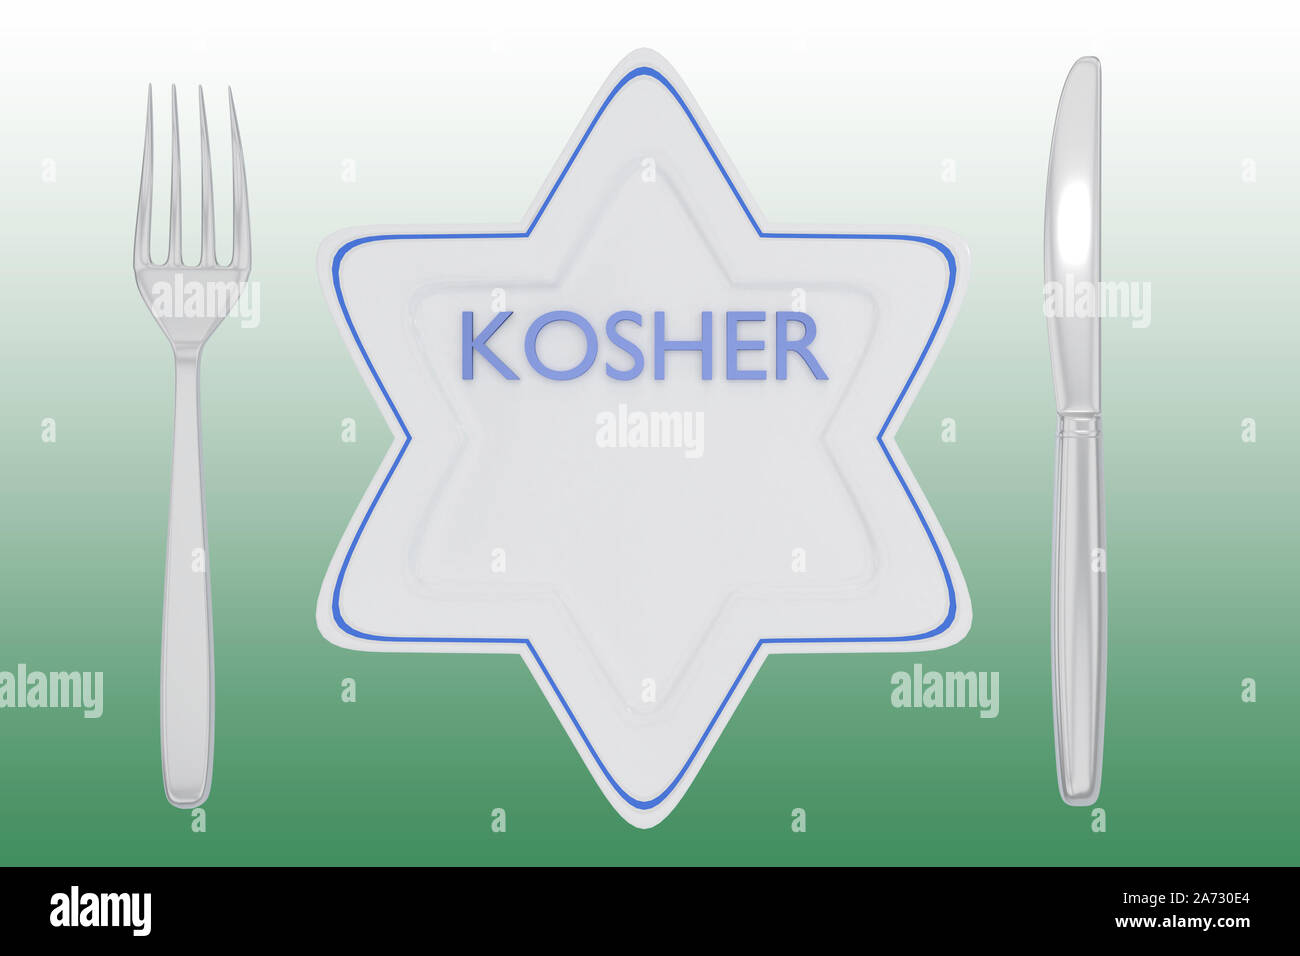 3D illustration of KOSHER title on a white plate shaped as David Star, along with silver knif and fork, on a green gradient. Stock Photo